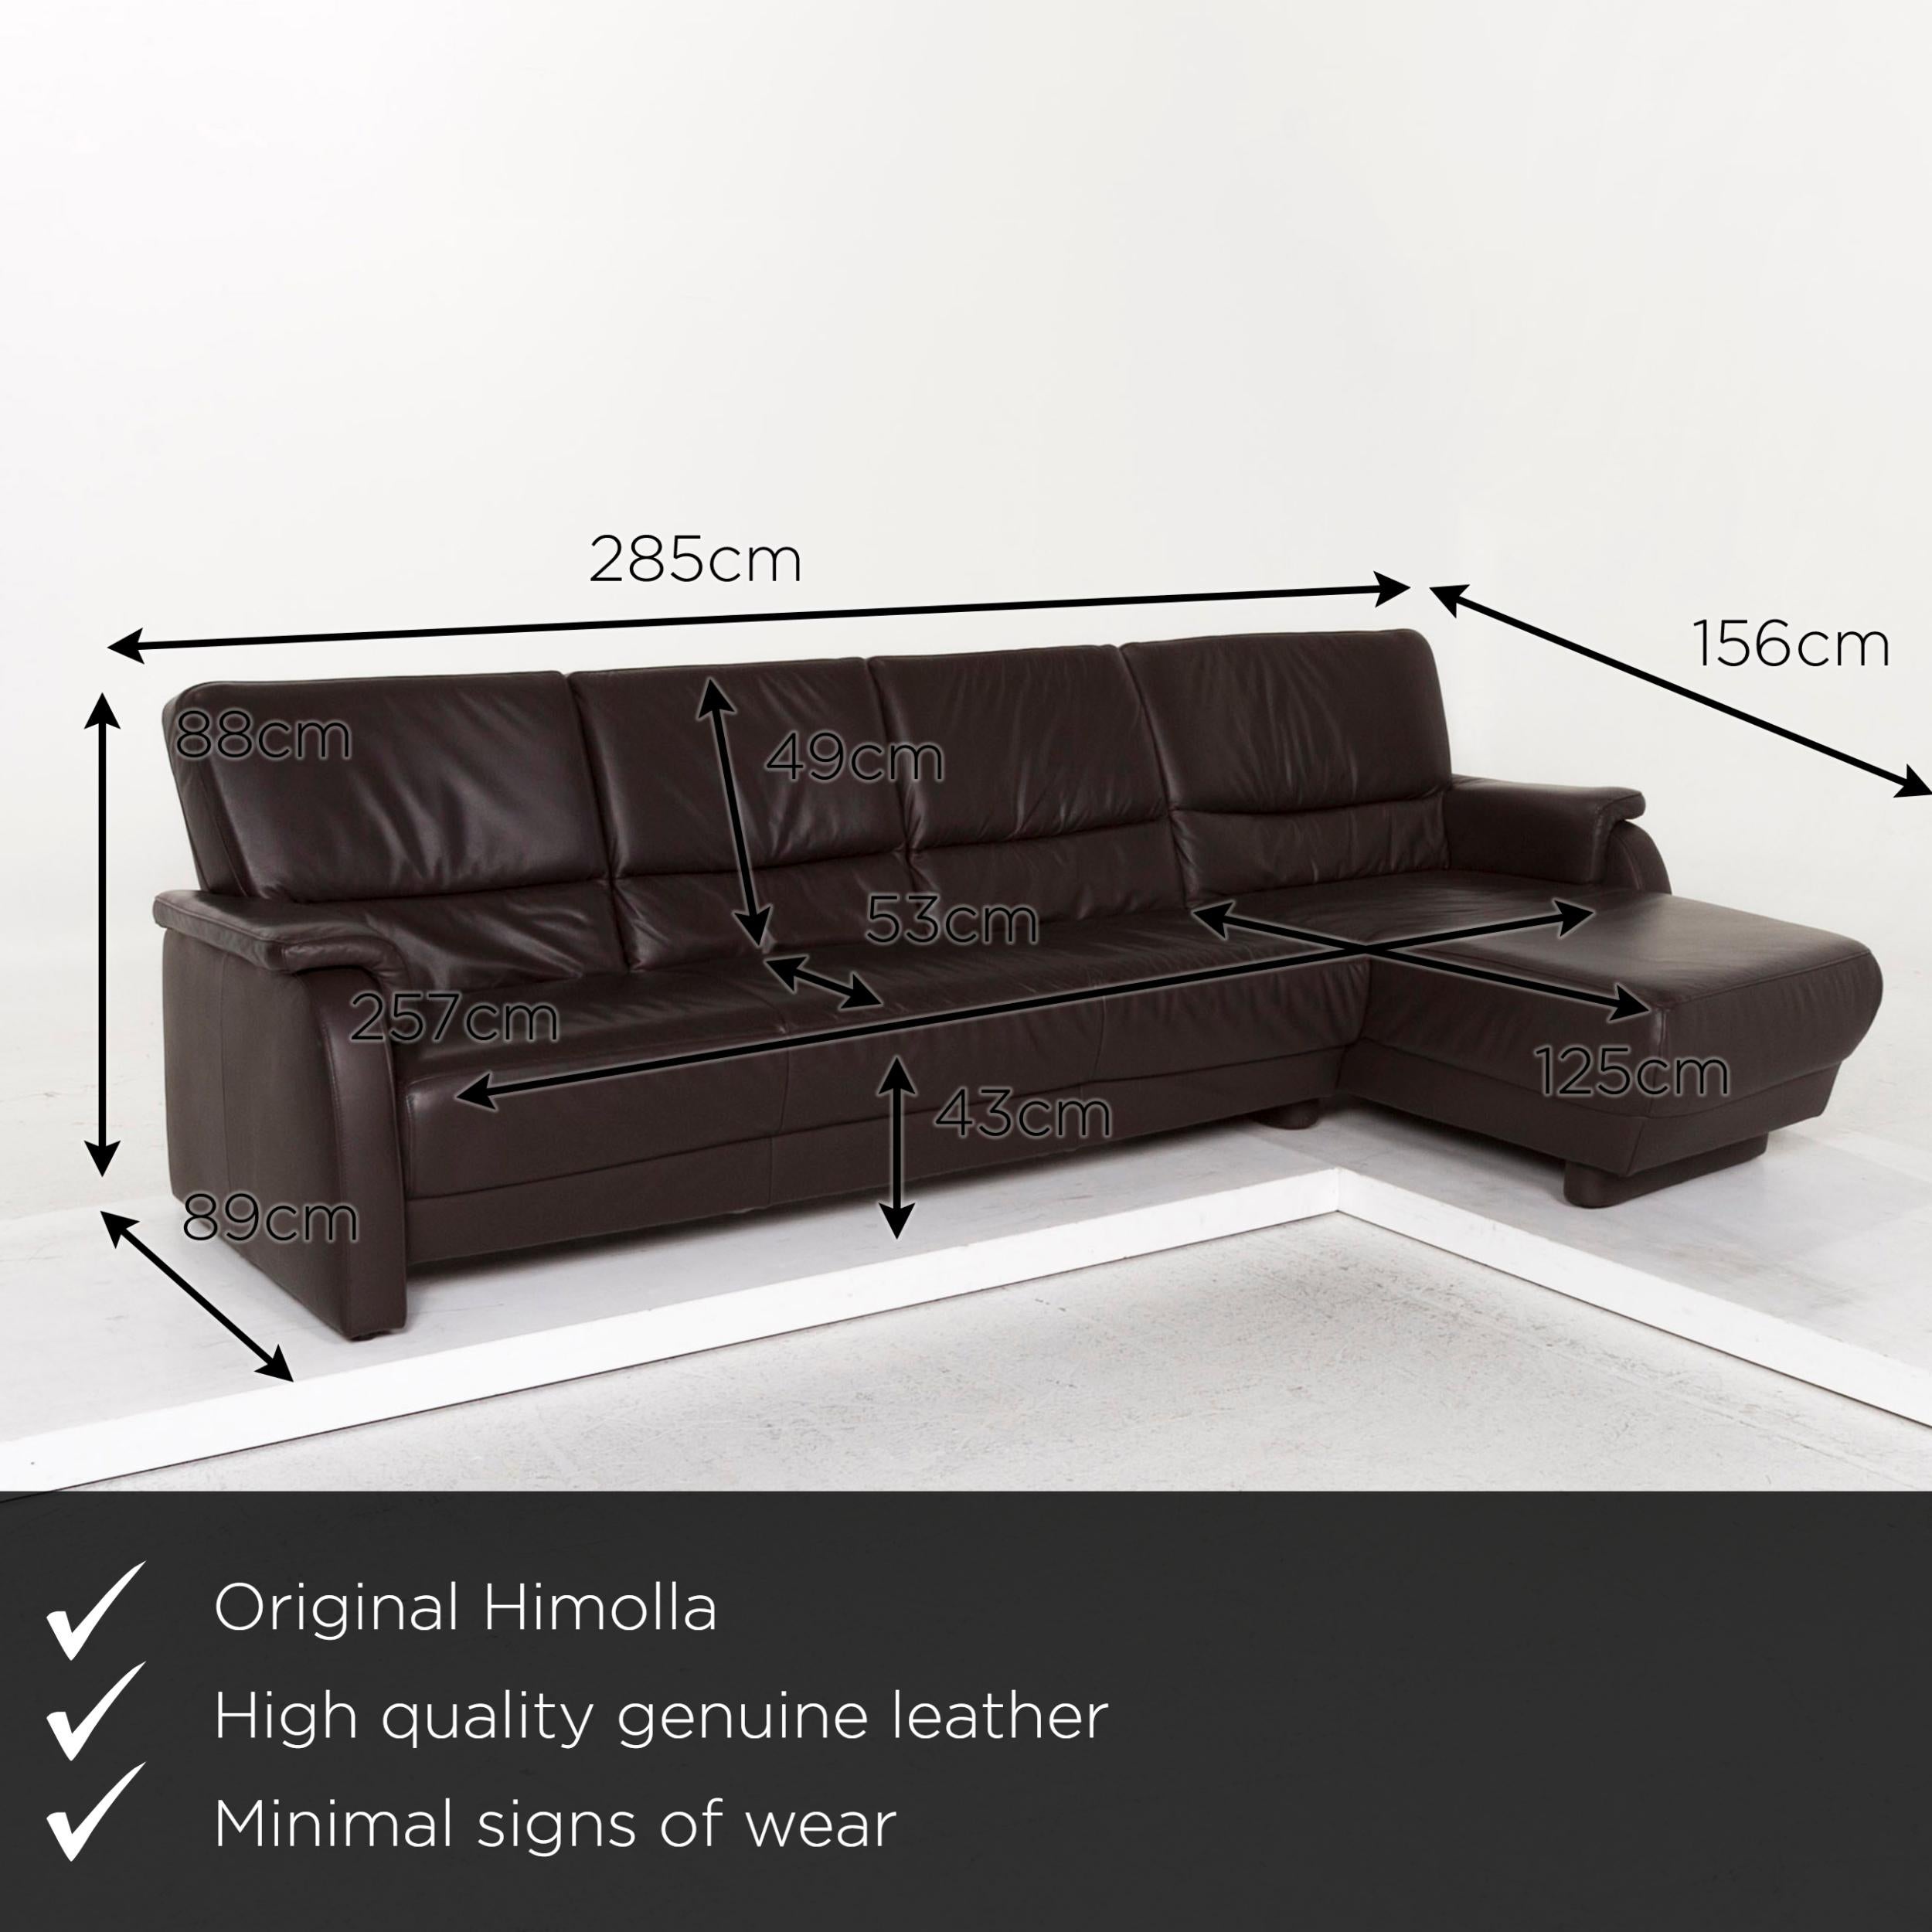 We present to you a Himolla leather corner sofa brown dark brown couch.
   
 

 Product measurements in centimeters:
 

Depth 89
Width 285
Height 88
Seat height 43
Rest height 57
Seat depth 53
Seat width 257
Back height 49.